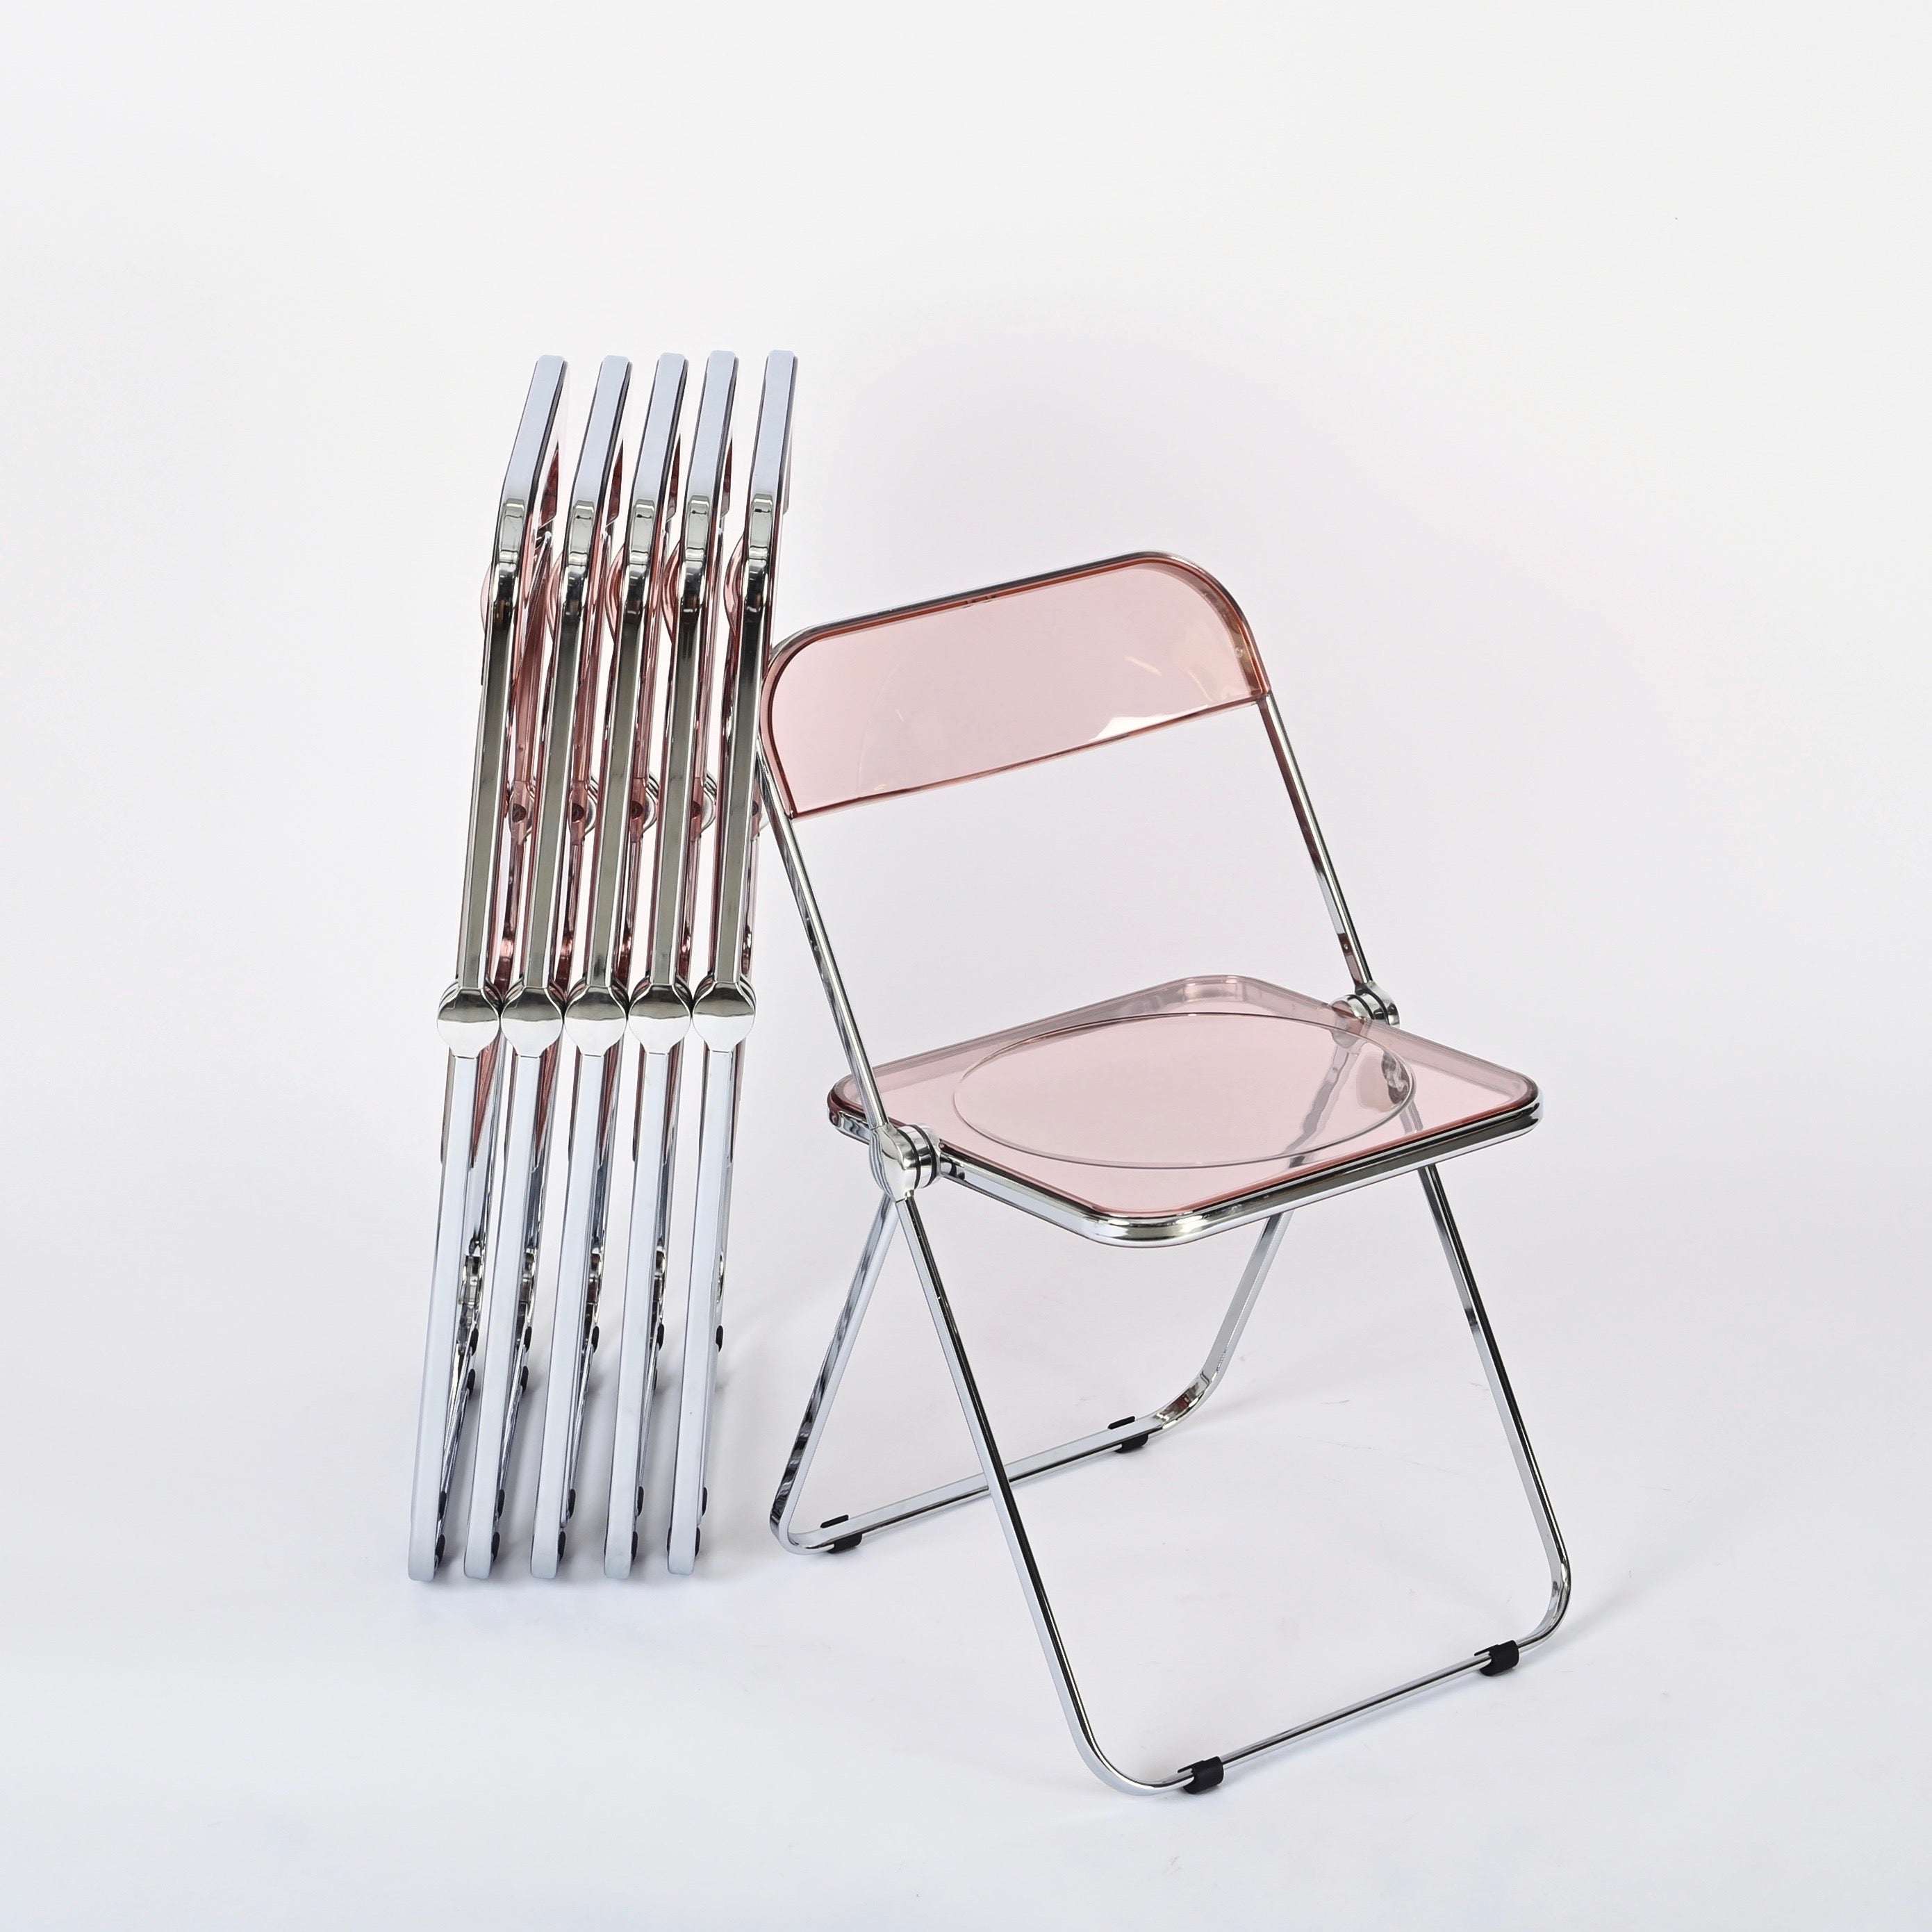 Set of 6 Lucite Pink and Chrome Plia Chairs, Piretti for Castelli, Italy 1970s